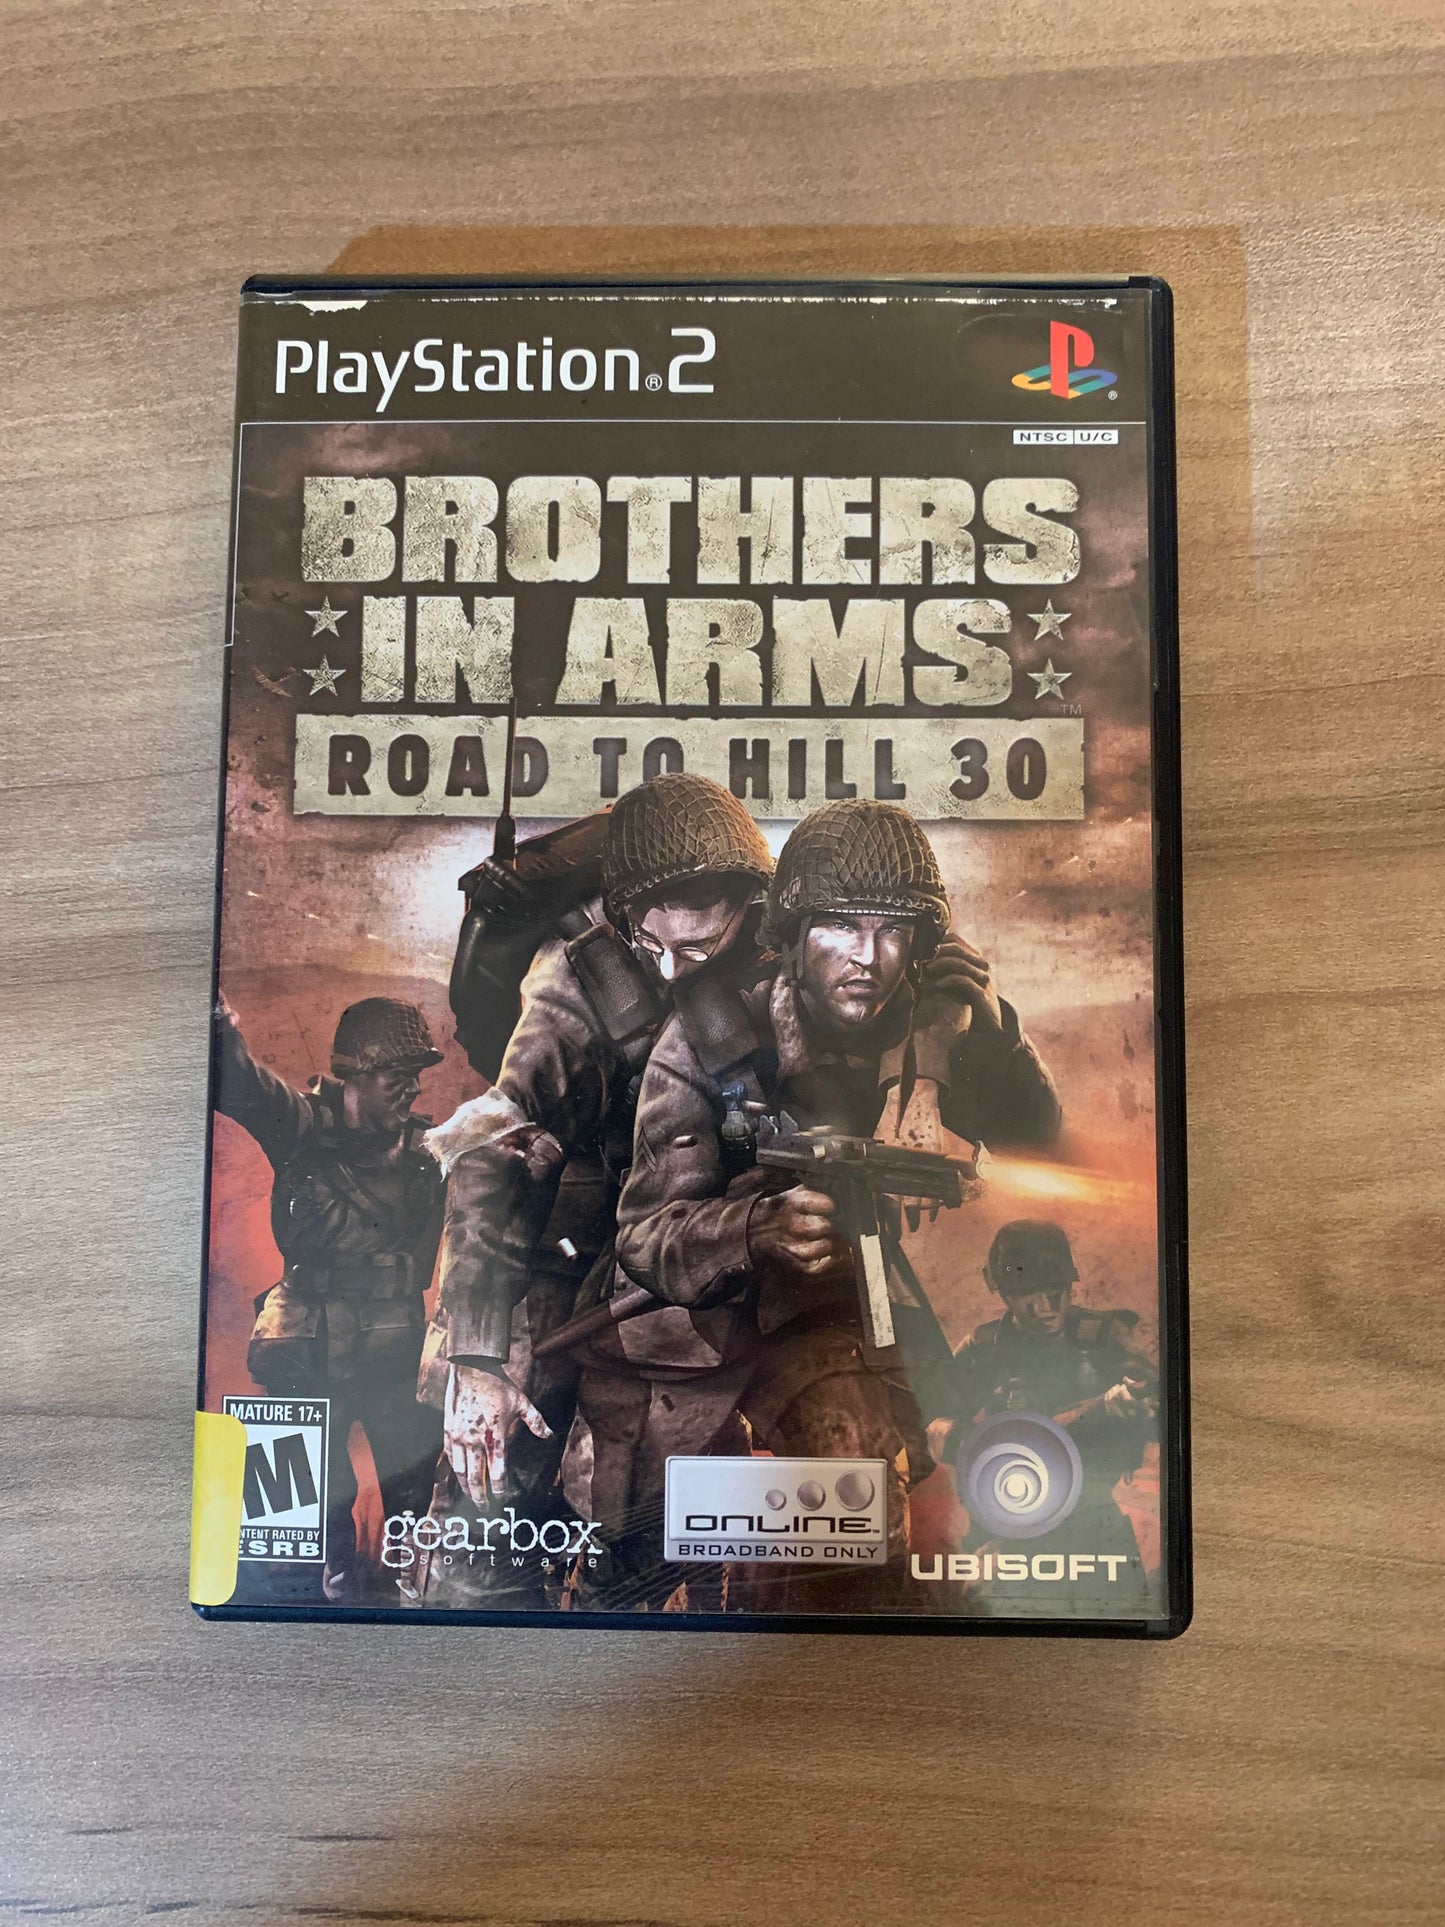 SONY PLAYSTATiON 2 [PS2] | BROTHERS iN ARMS ROAD TO HiLL 30